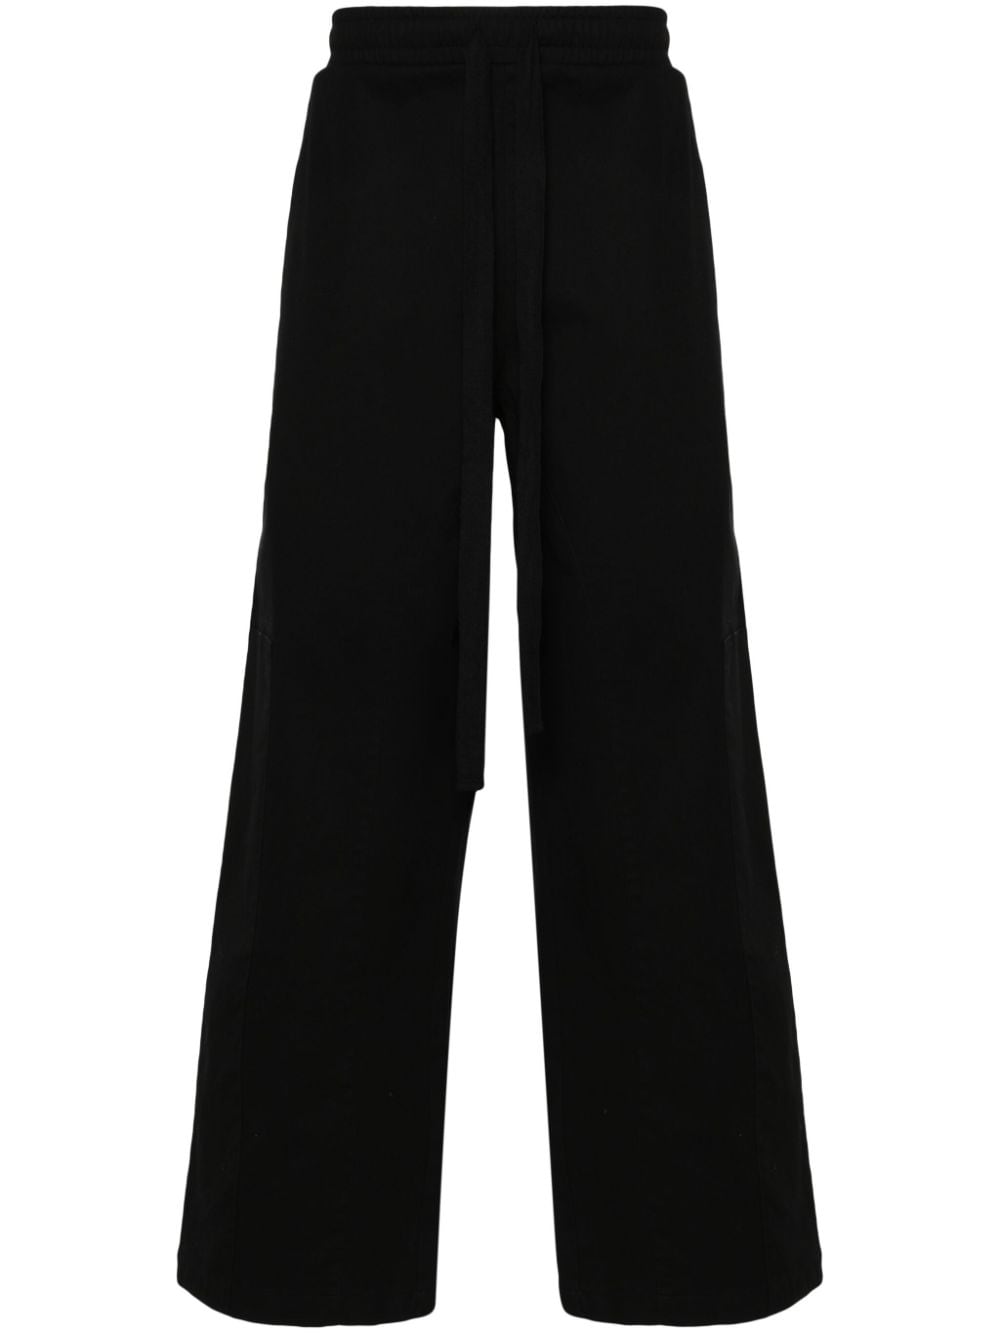 A-COLD-WALL* drawstring twill trousers - Black von A-COLD-WALL*